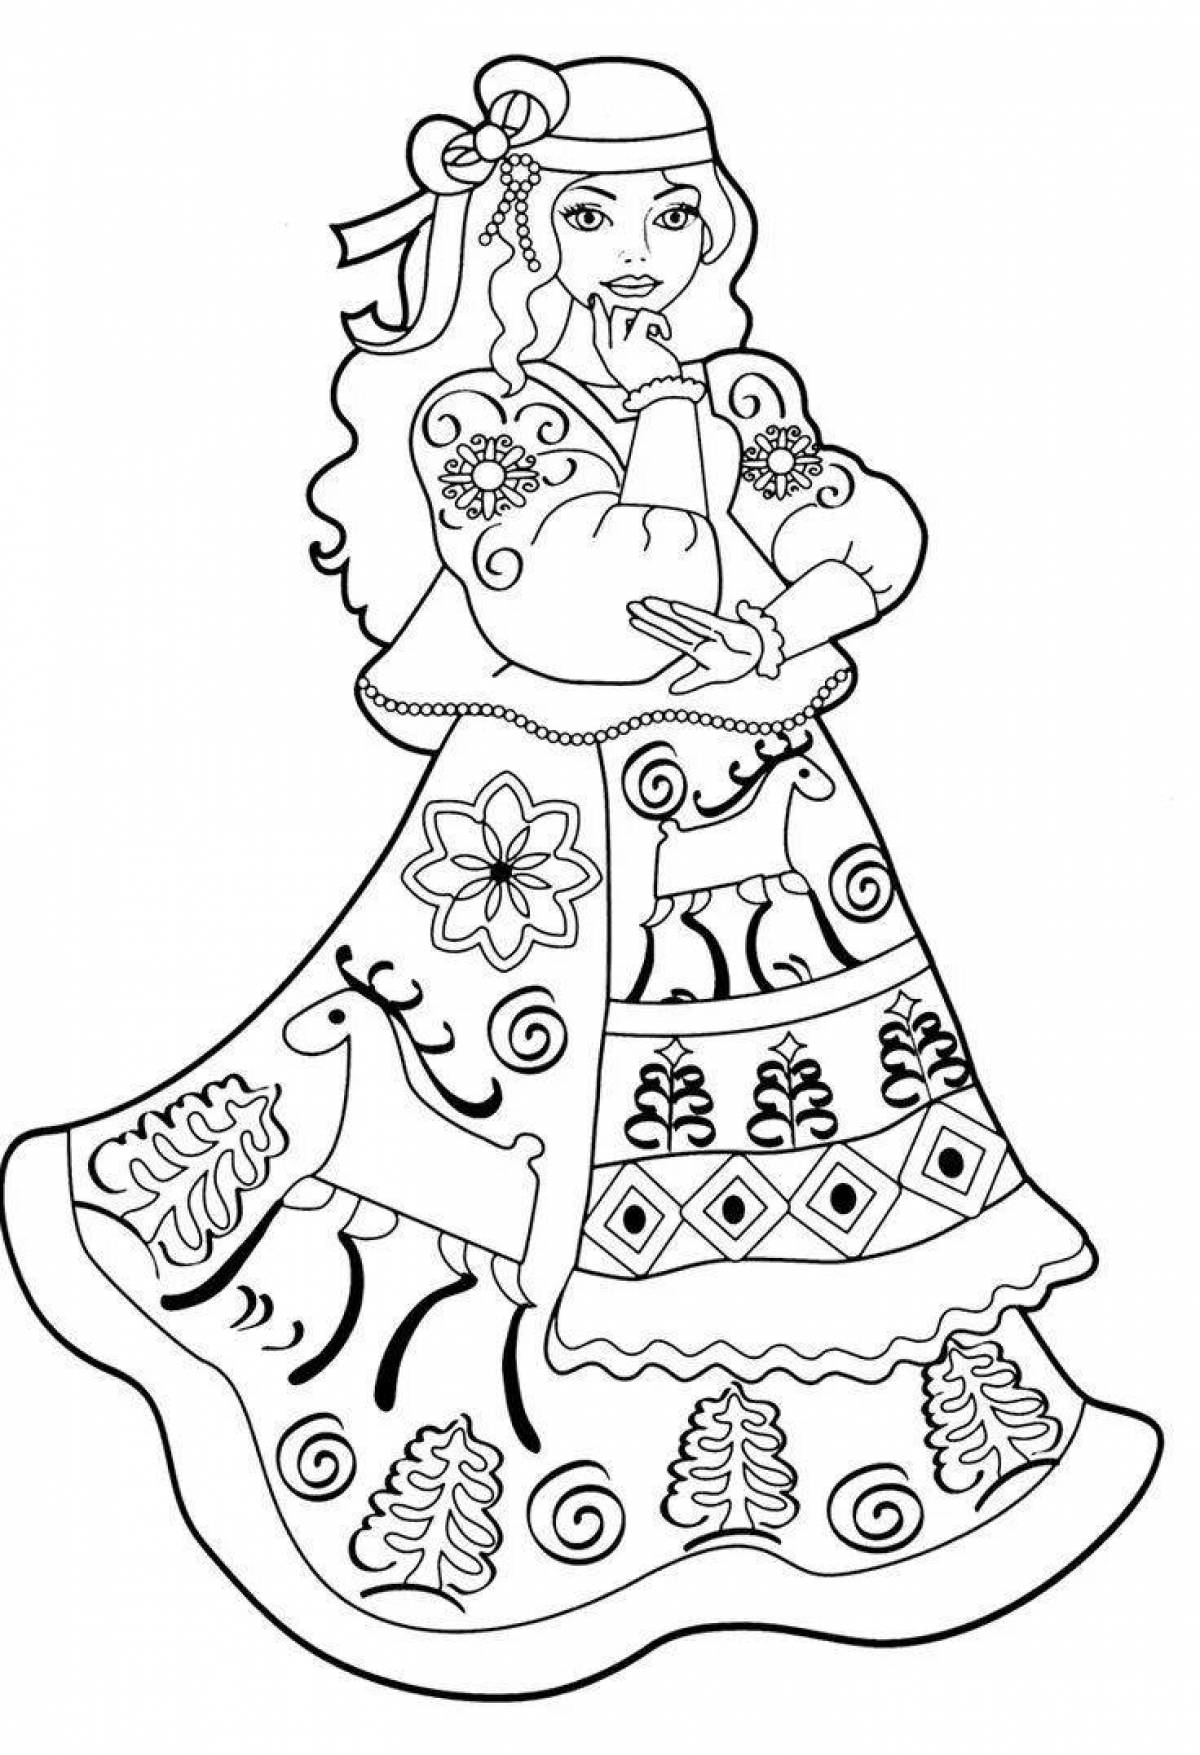 Coloring page dazzling Russian beauty